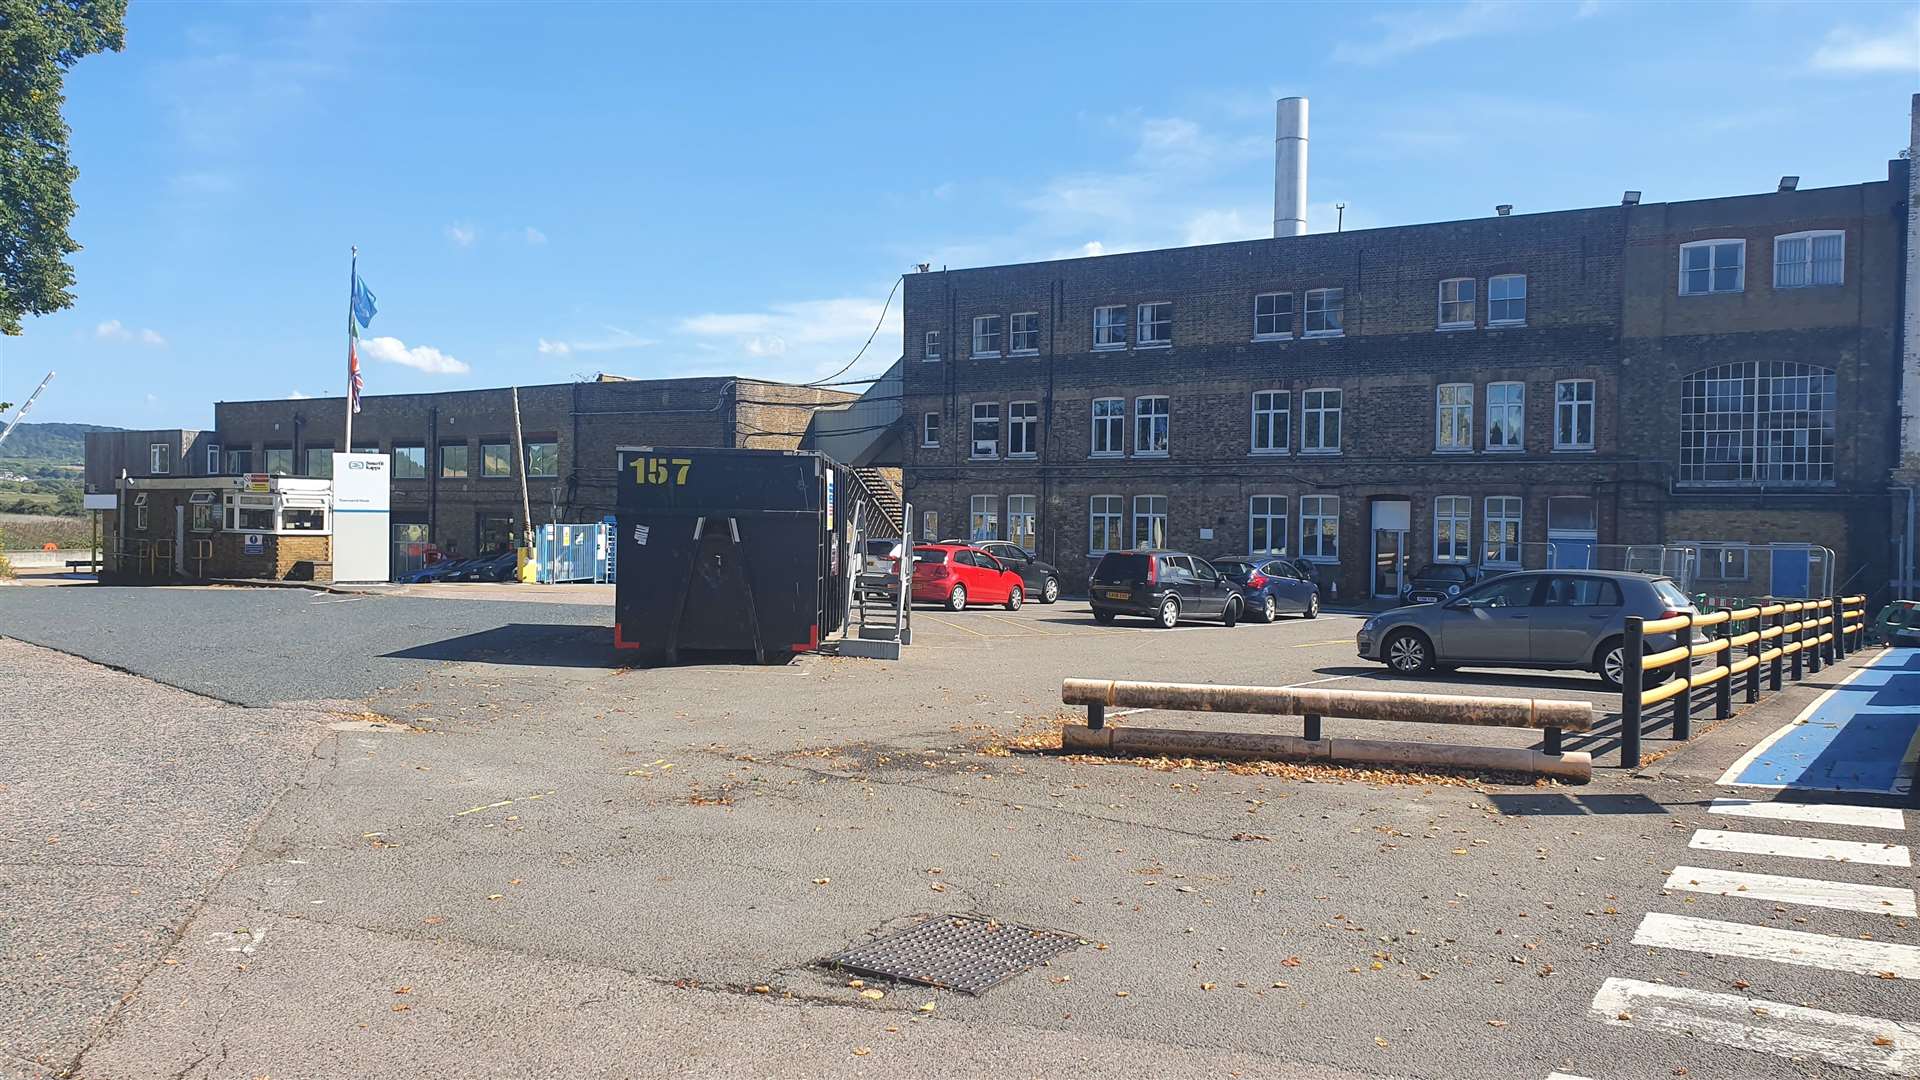 The paper mill where the Wheatsheaf and Papermill pubs once stood